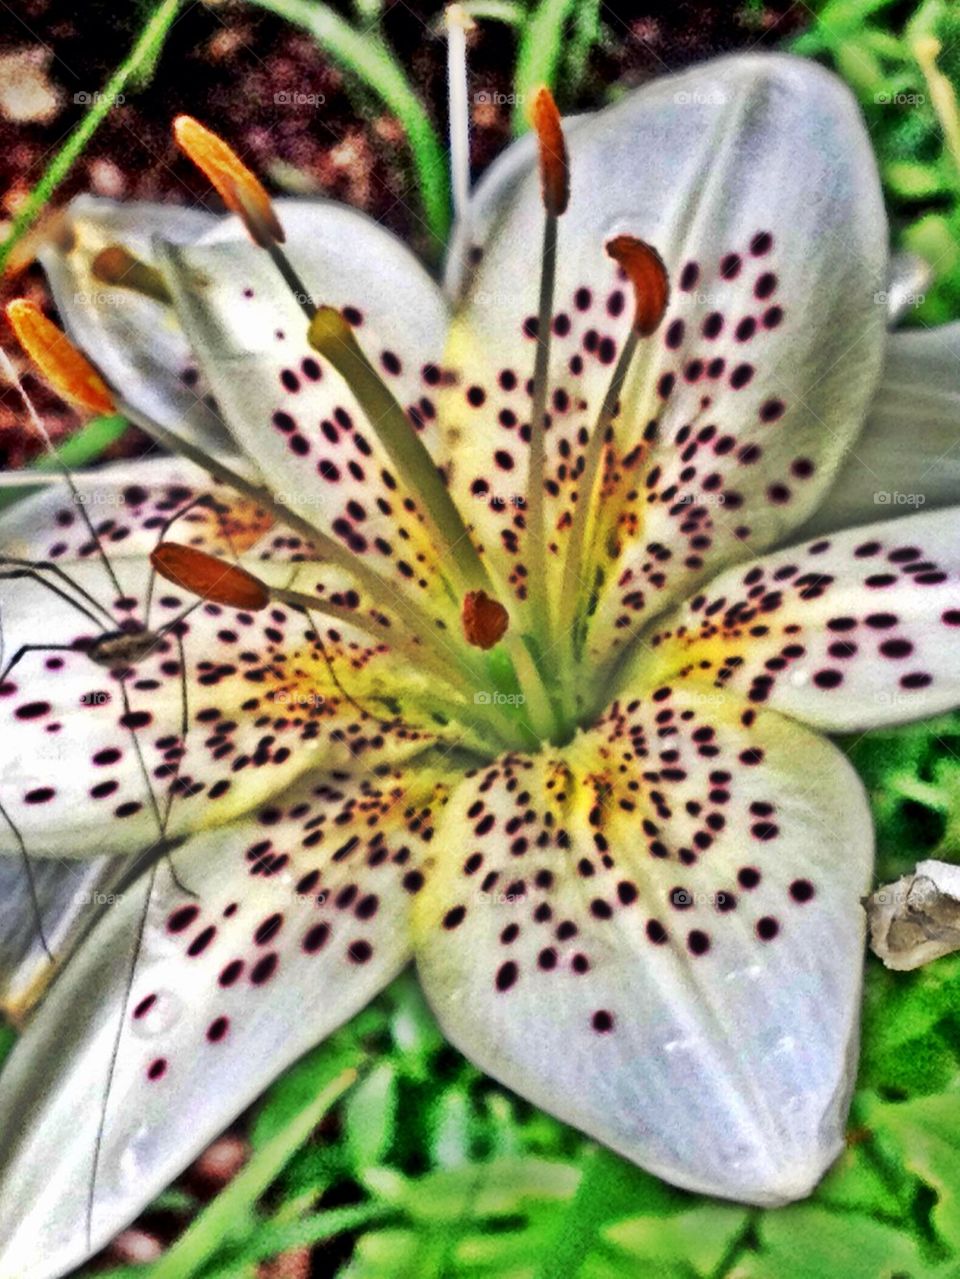 Lily macro with long-legged guest